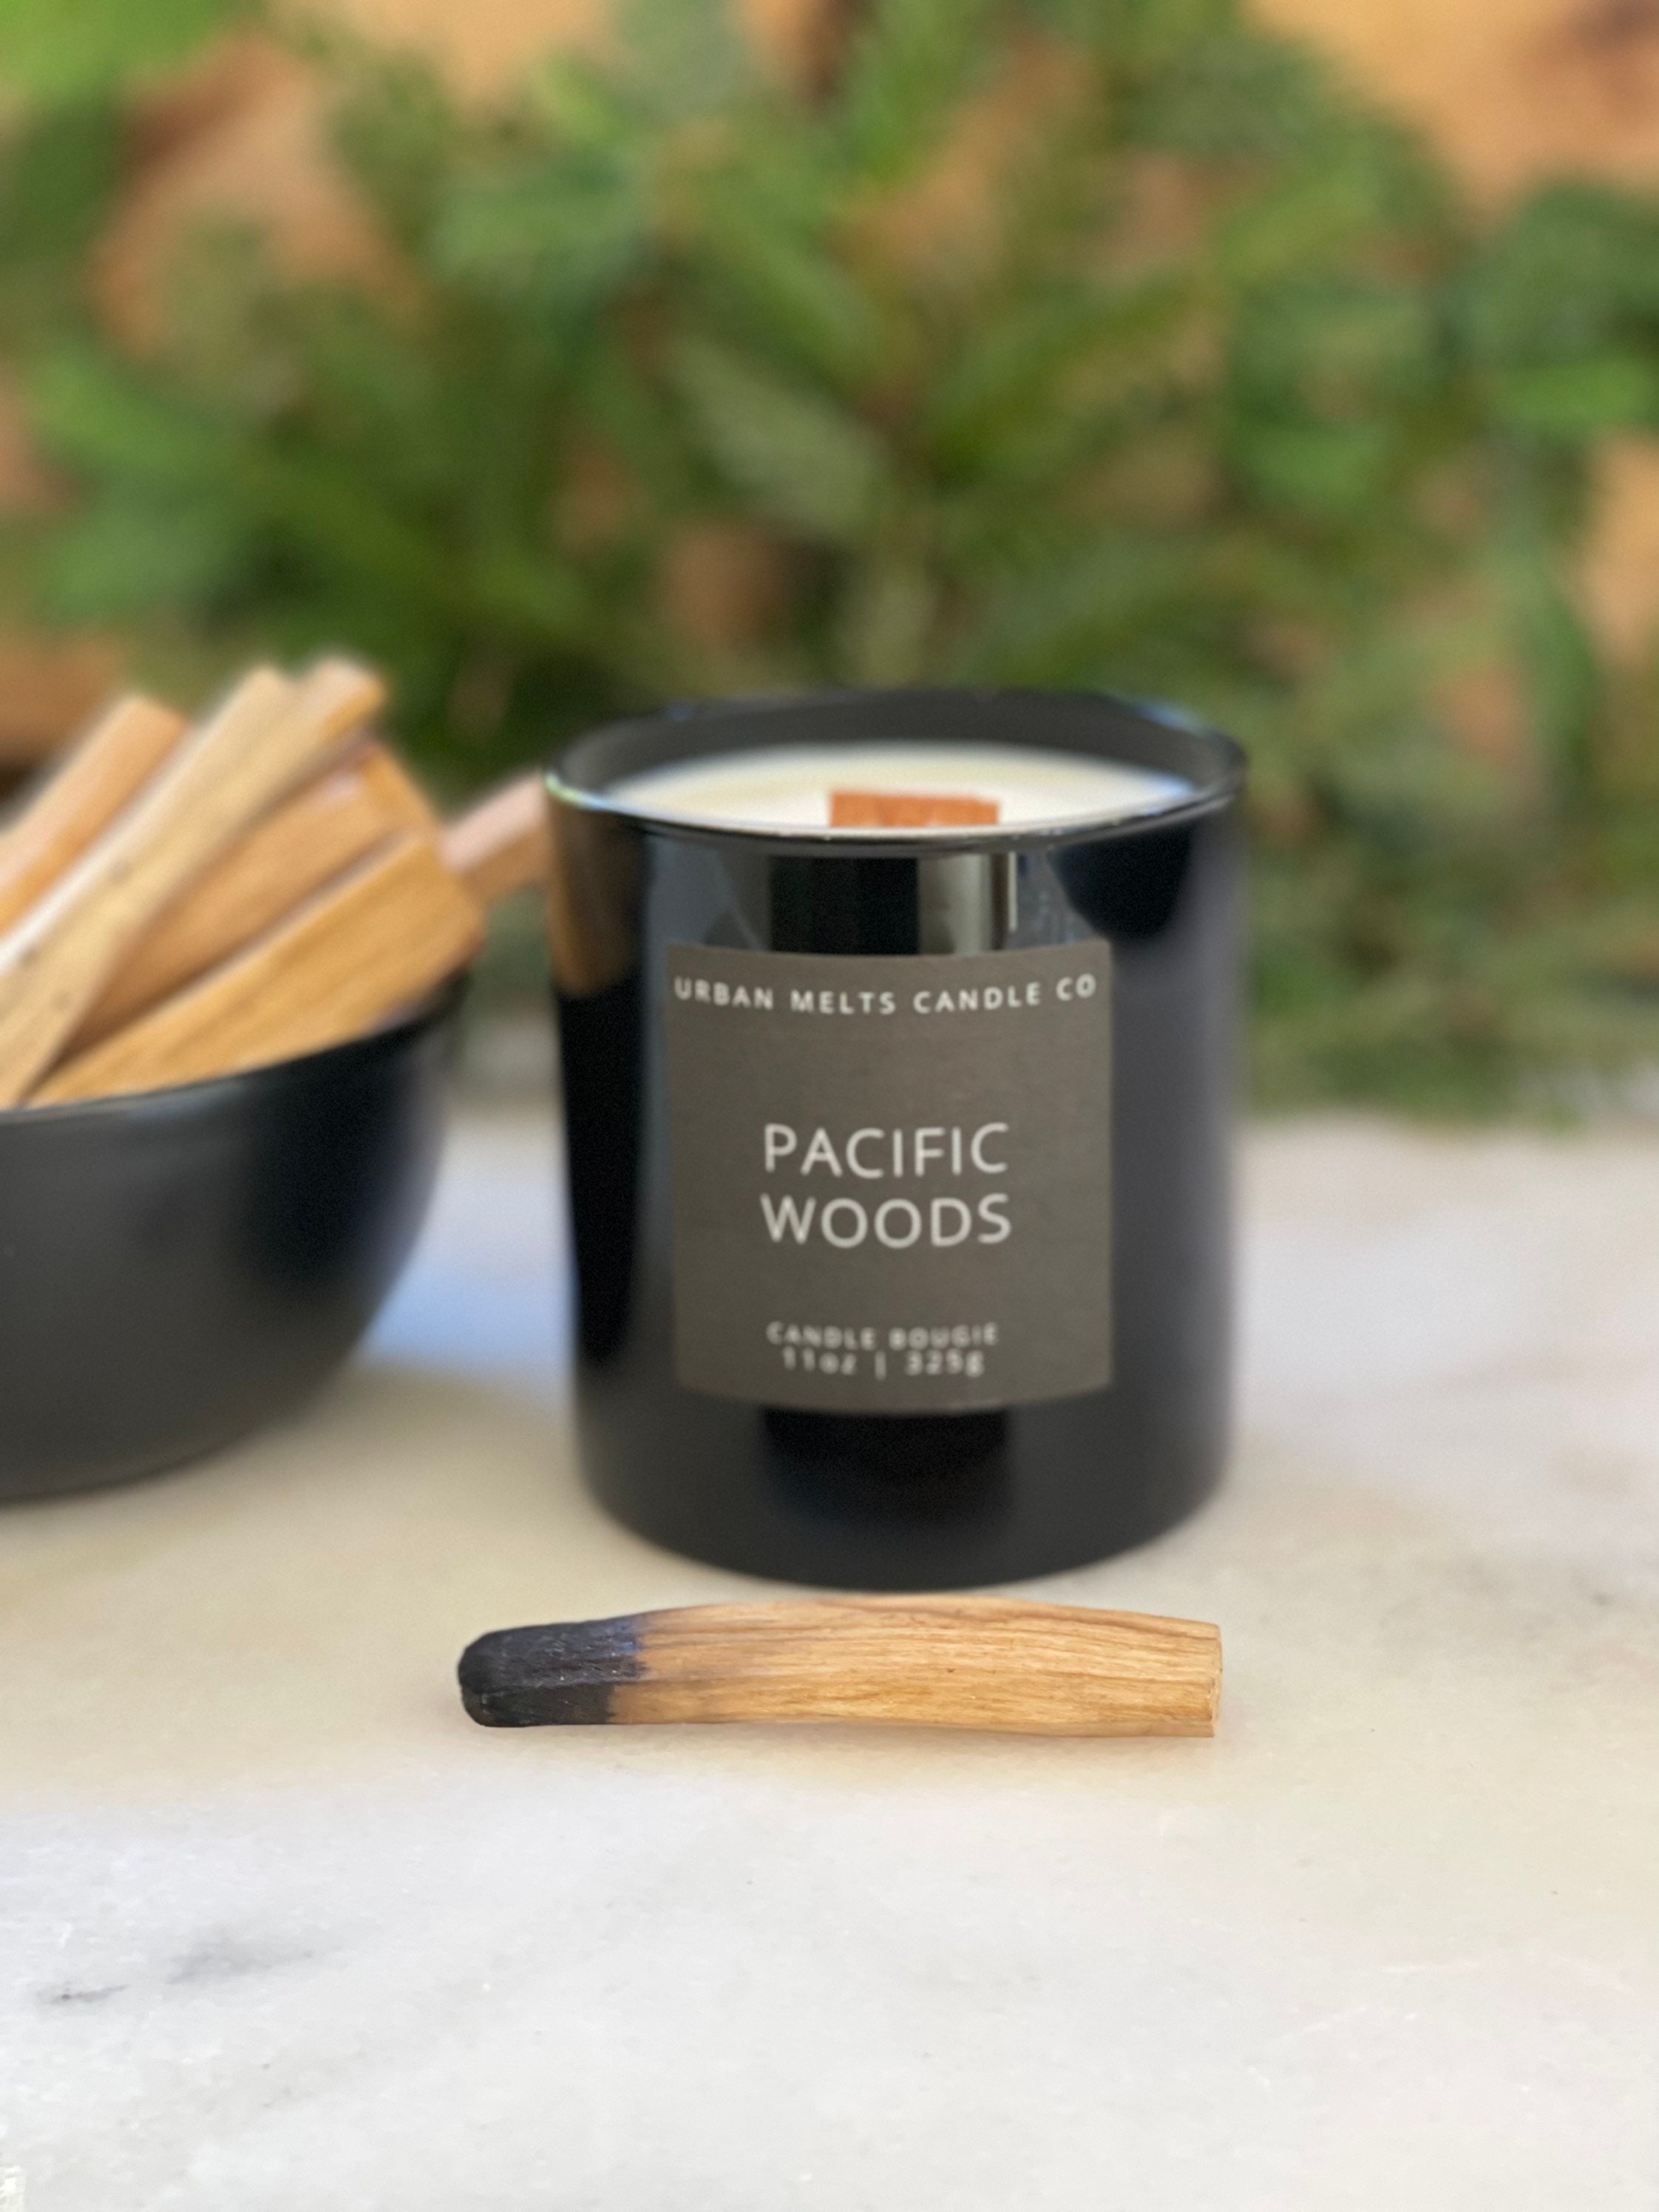 16 Best Sand and Fog Candles From Sandalwood to Winter Pine